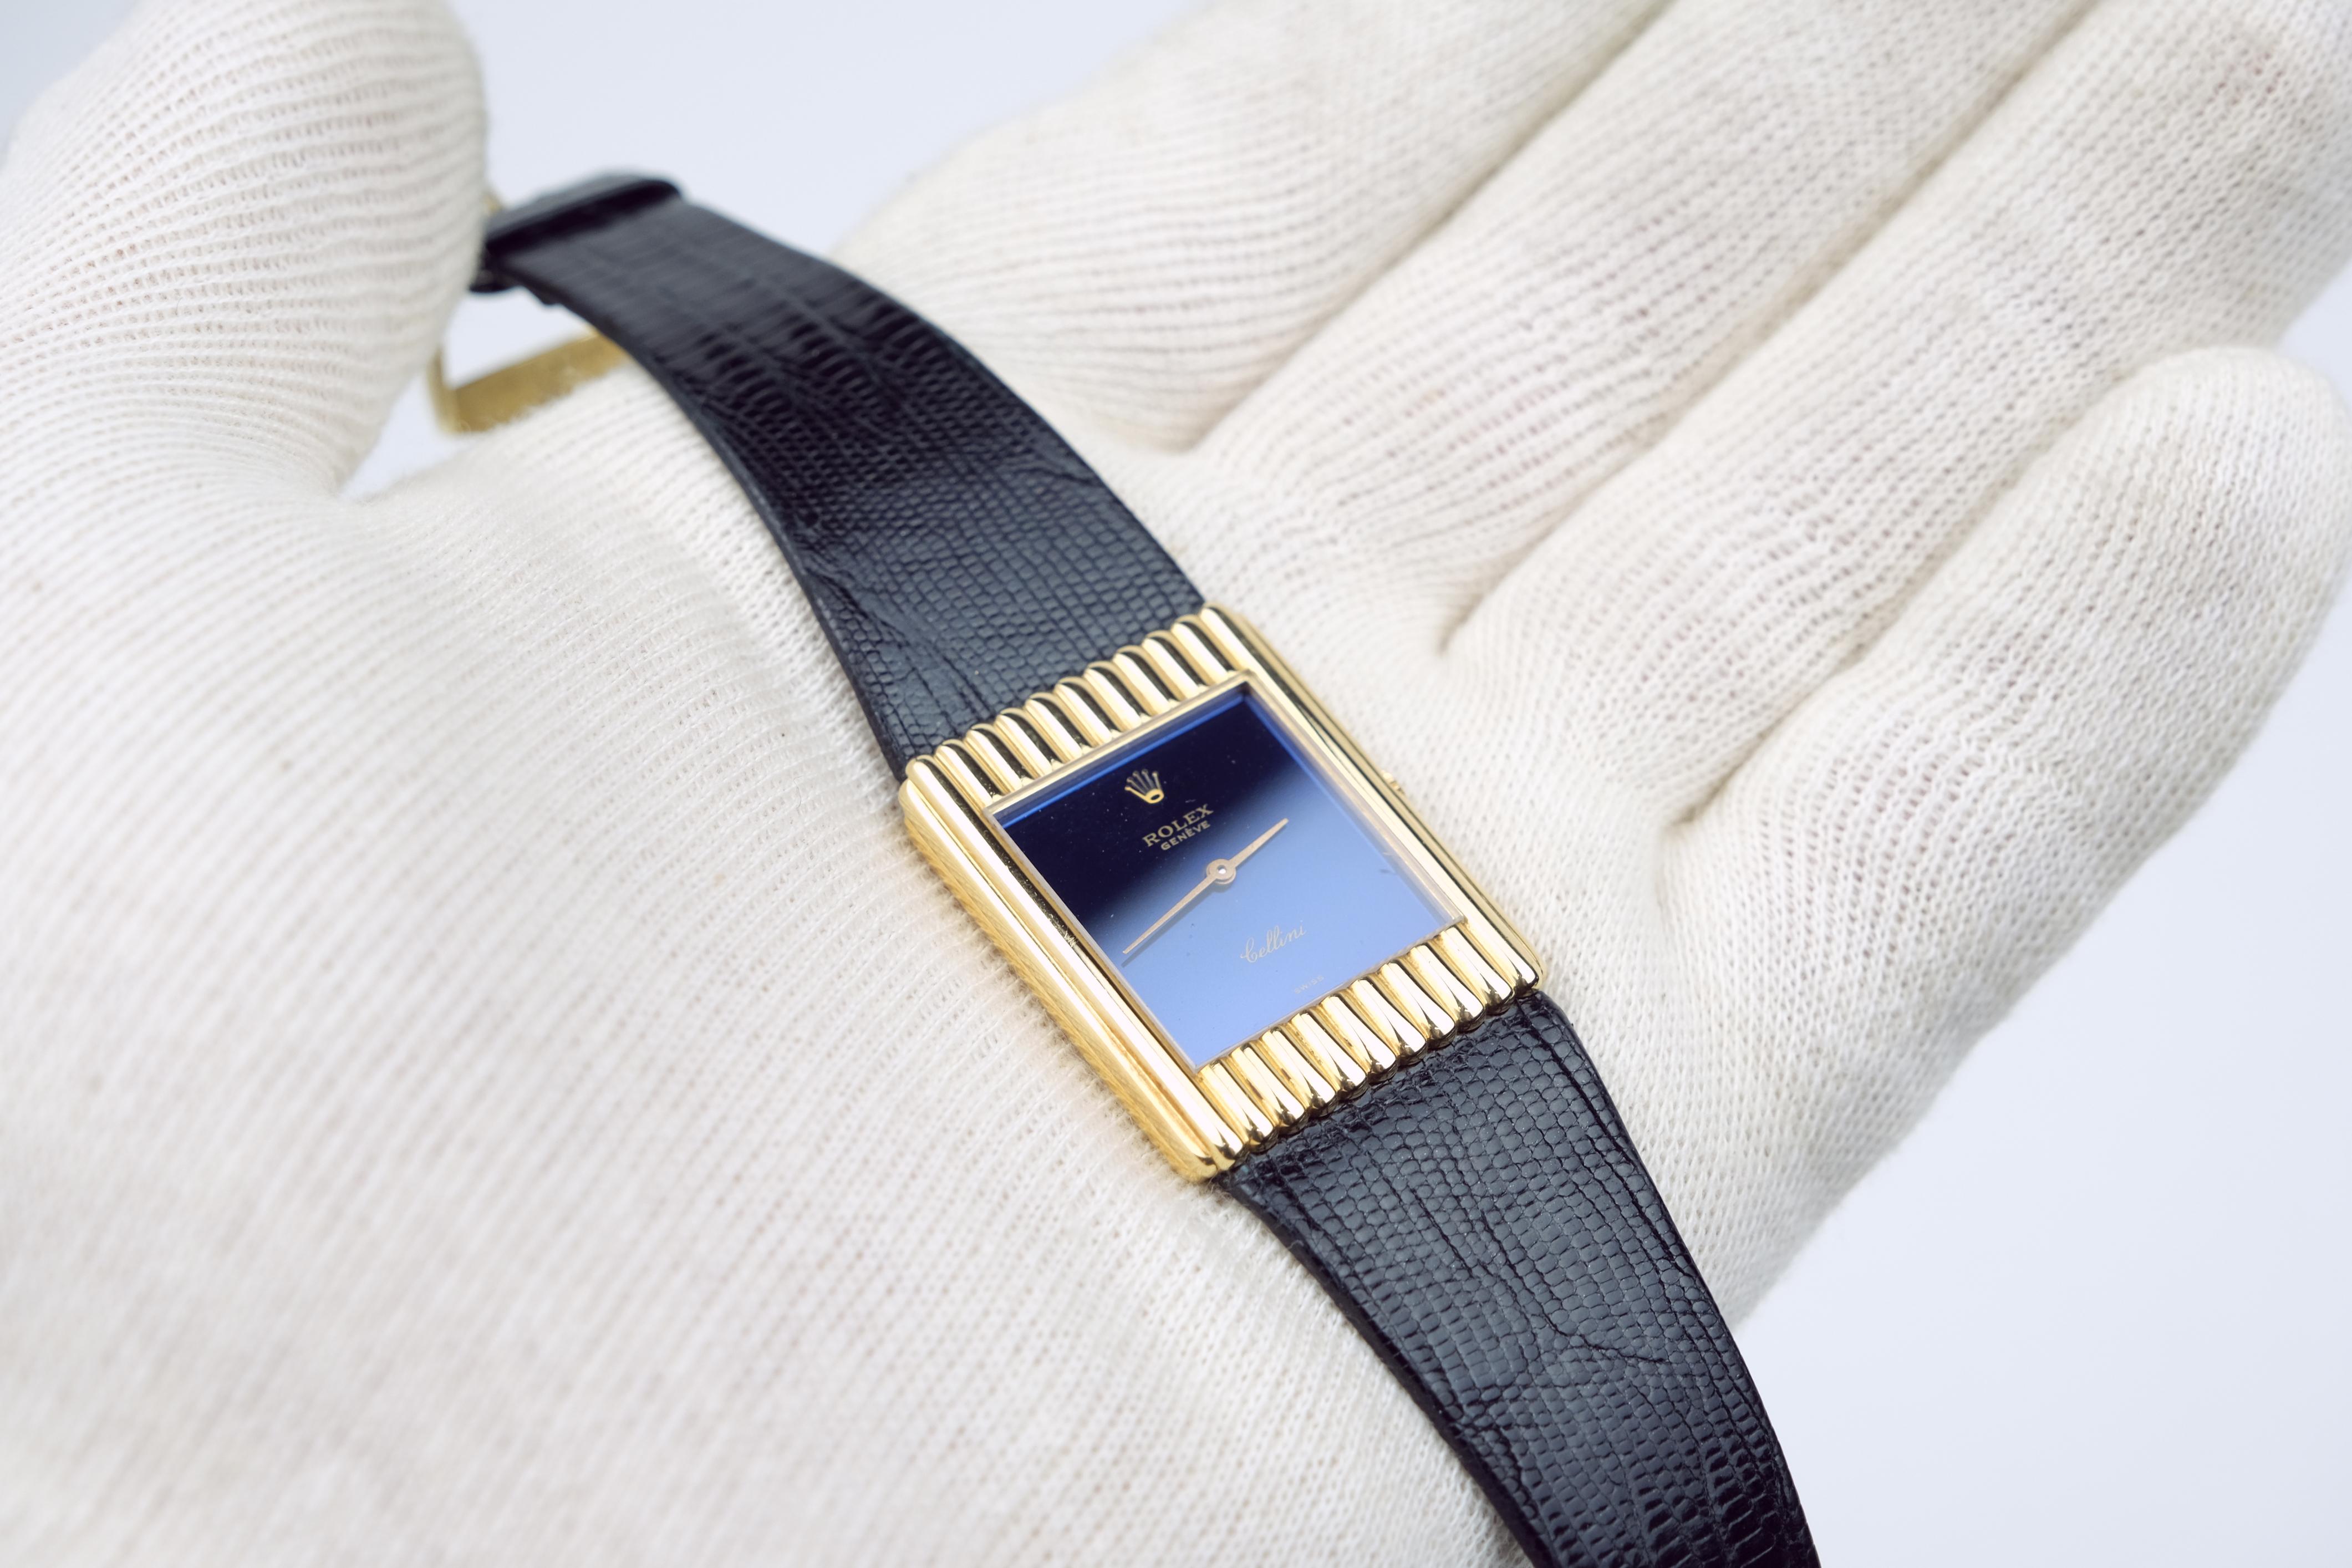 A Rolex Cellini 18K Gold Stem Wind Wristwatch. A luxury timepiece with a tank-style 18K yellow gold bezel that frames a navy blue dial with Rolex hallmark crown and gold-tone baton-styke hands.

This luxury watch also features an 18K yellow gold